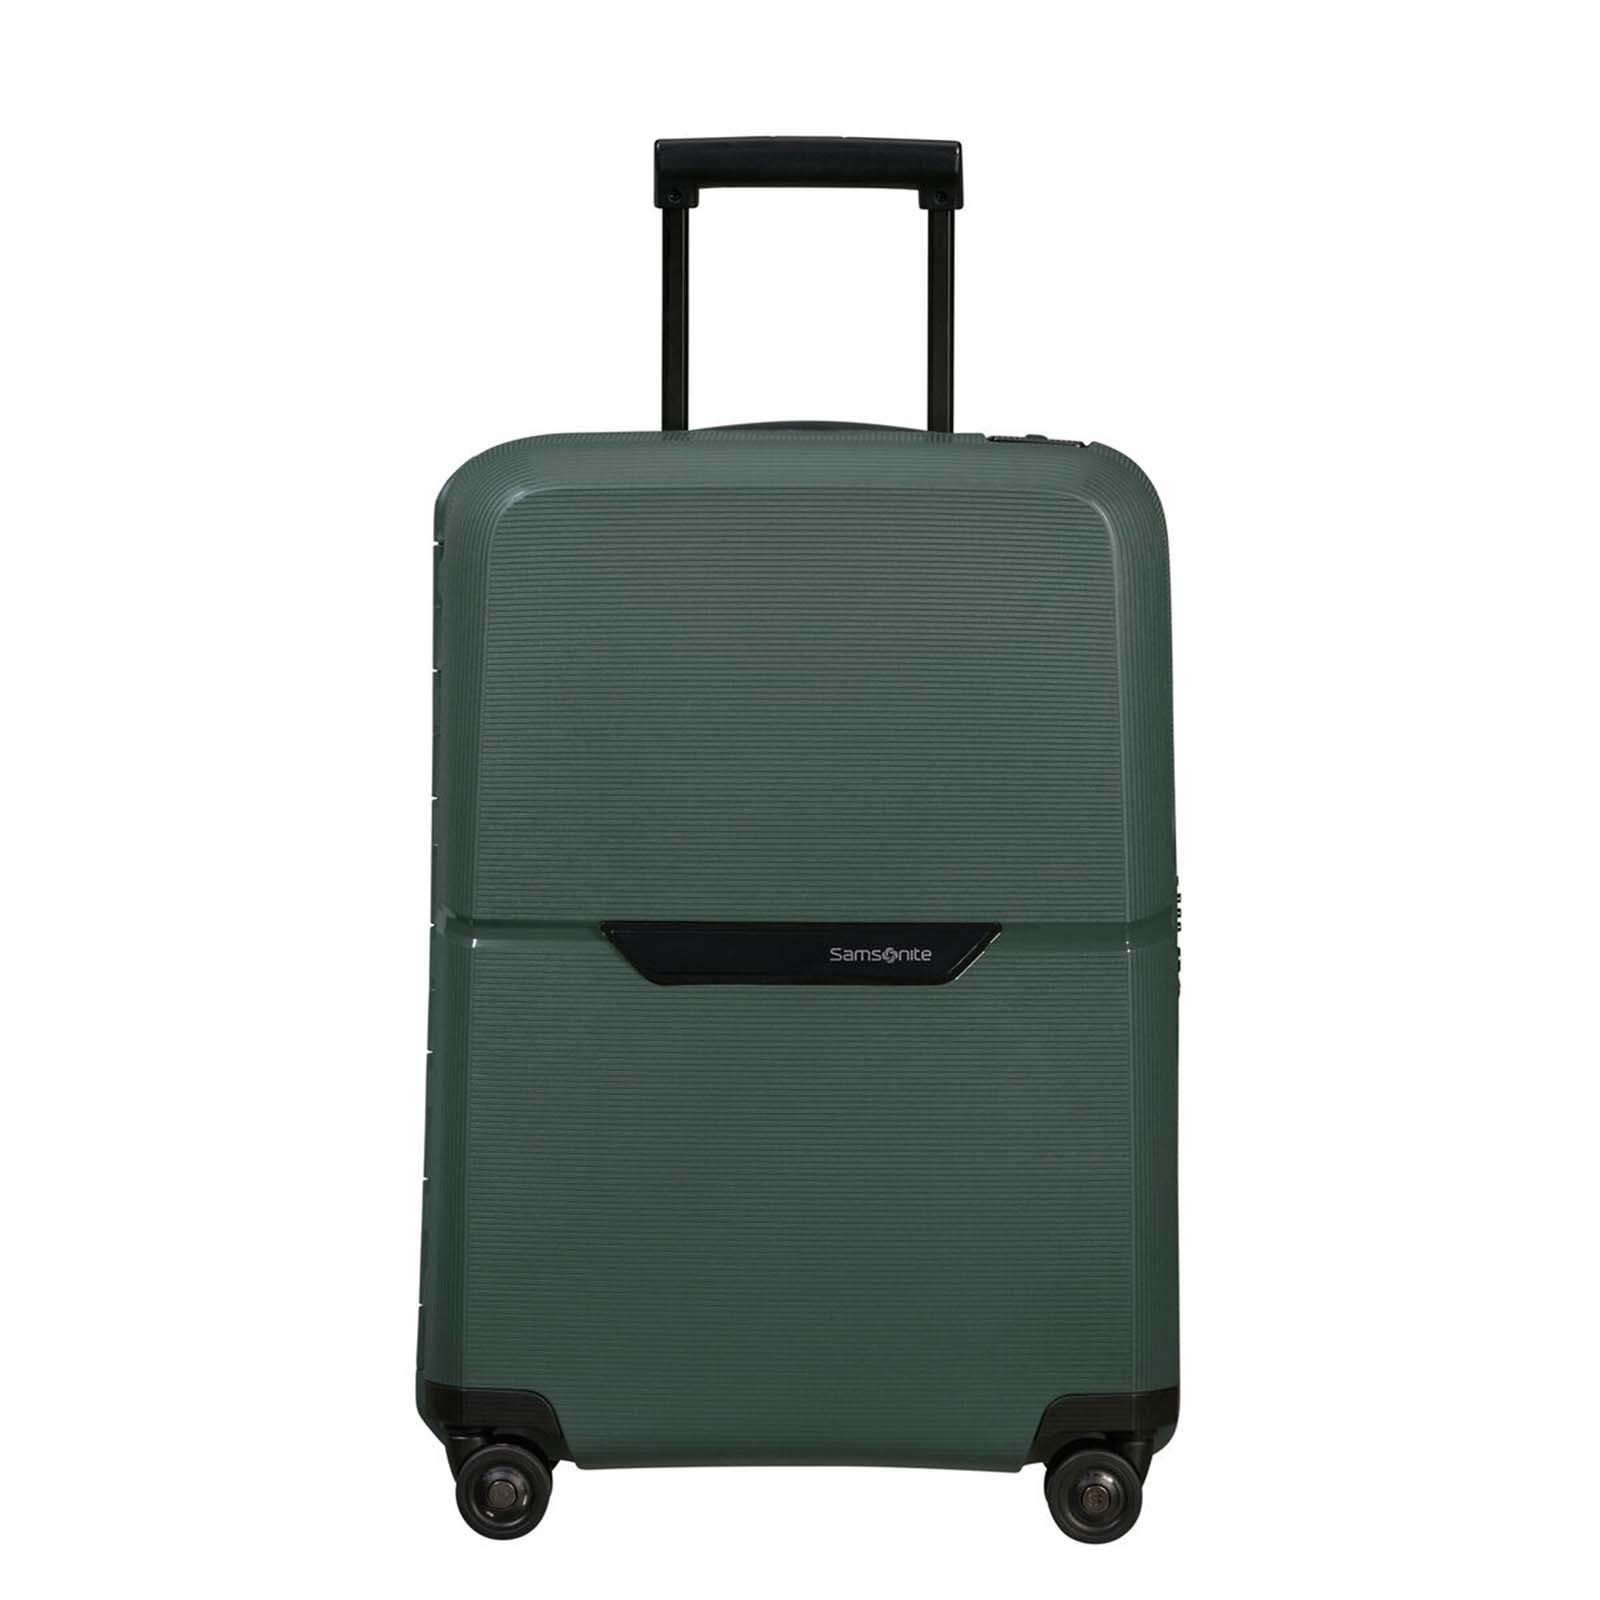 Samsonite-Magnum-Eco-55cm-Carry-On-Suitcase-Forest-Green-Front